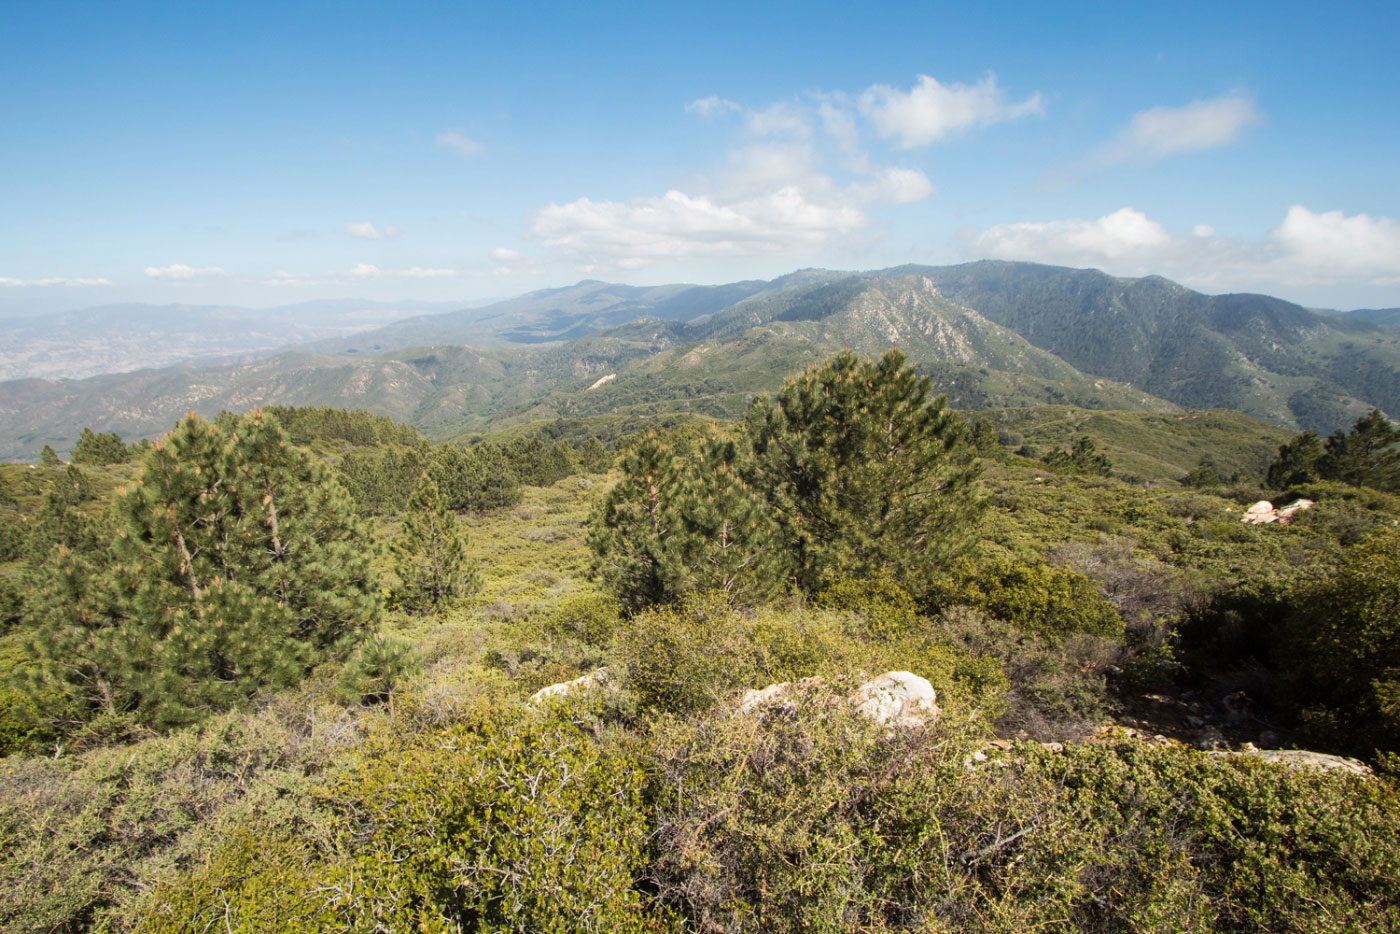 Hike Agua Tibia Mountain via Dripping Springs Trail in Cleveland National Forest, California - Stav is Lost